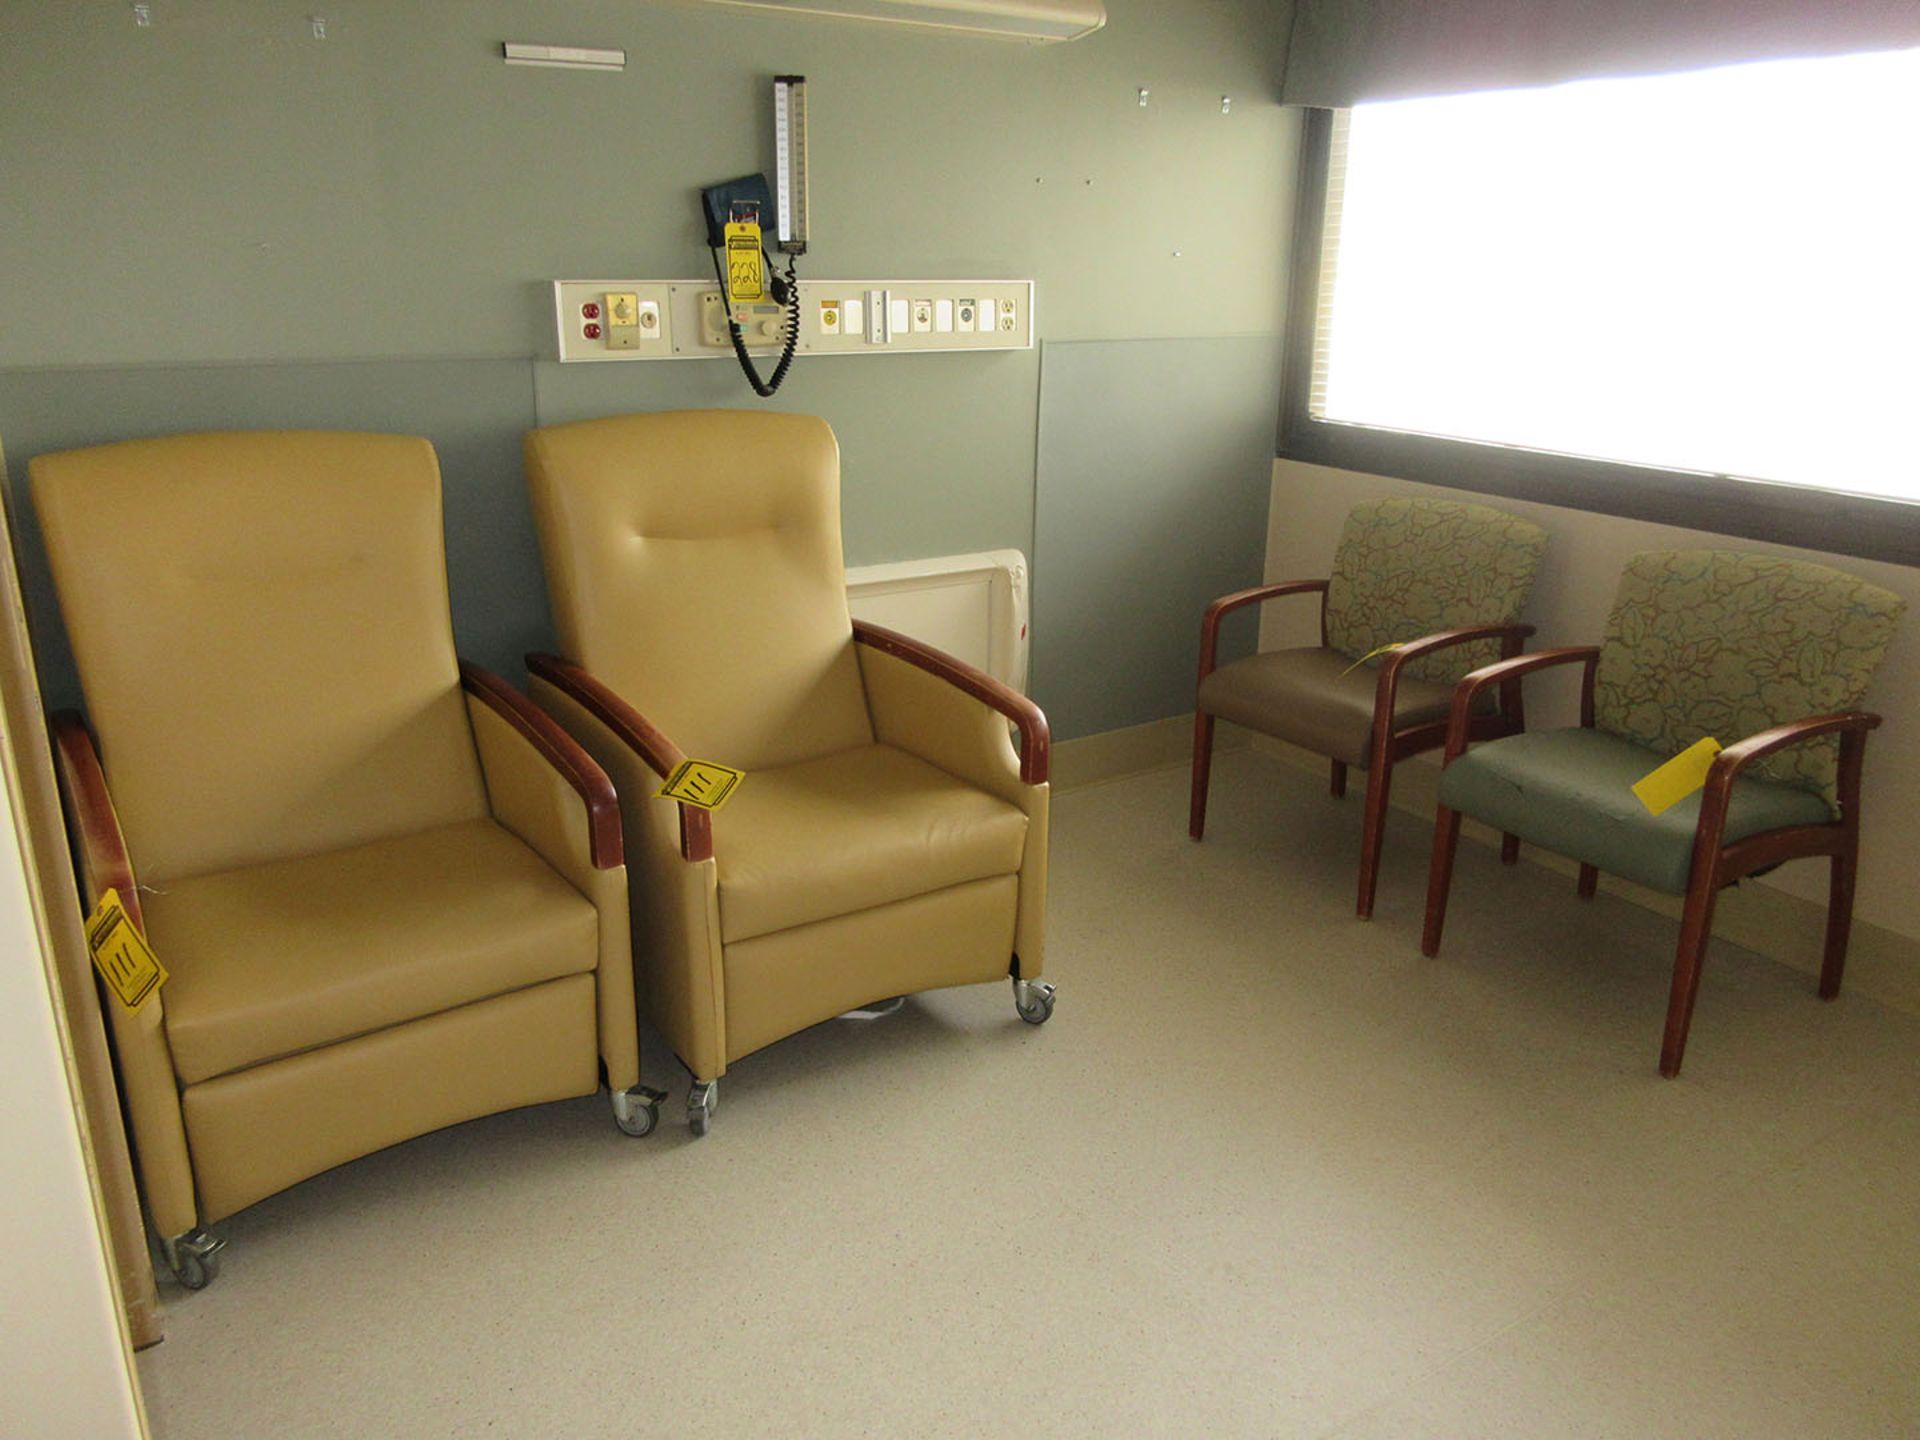 (2) PATIENT CHAIRS & (2) LOBBY CHAIRS